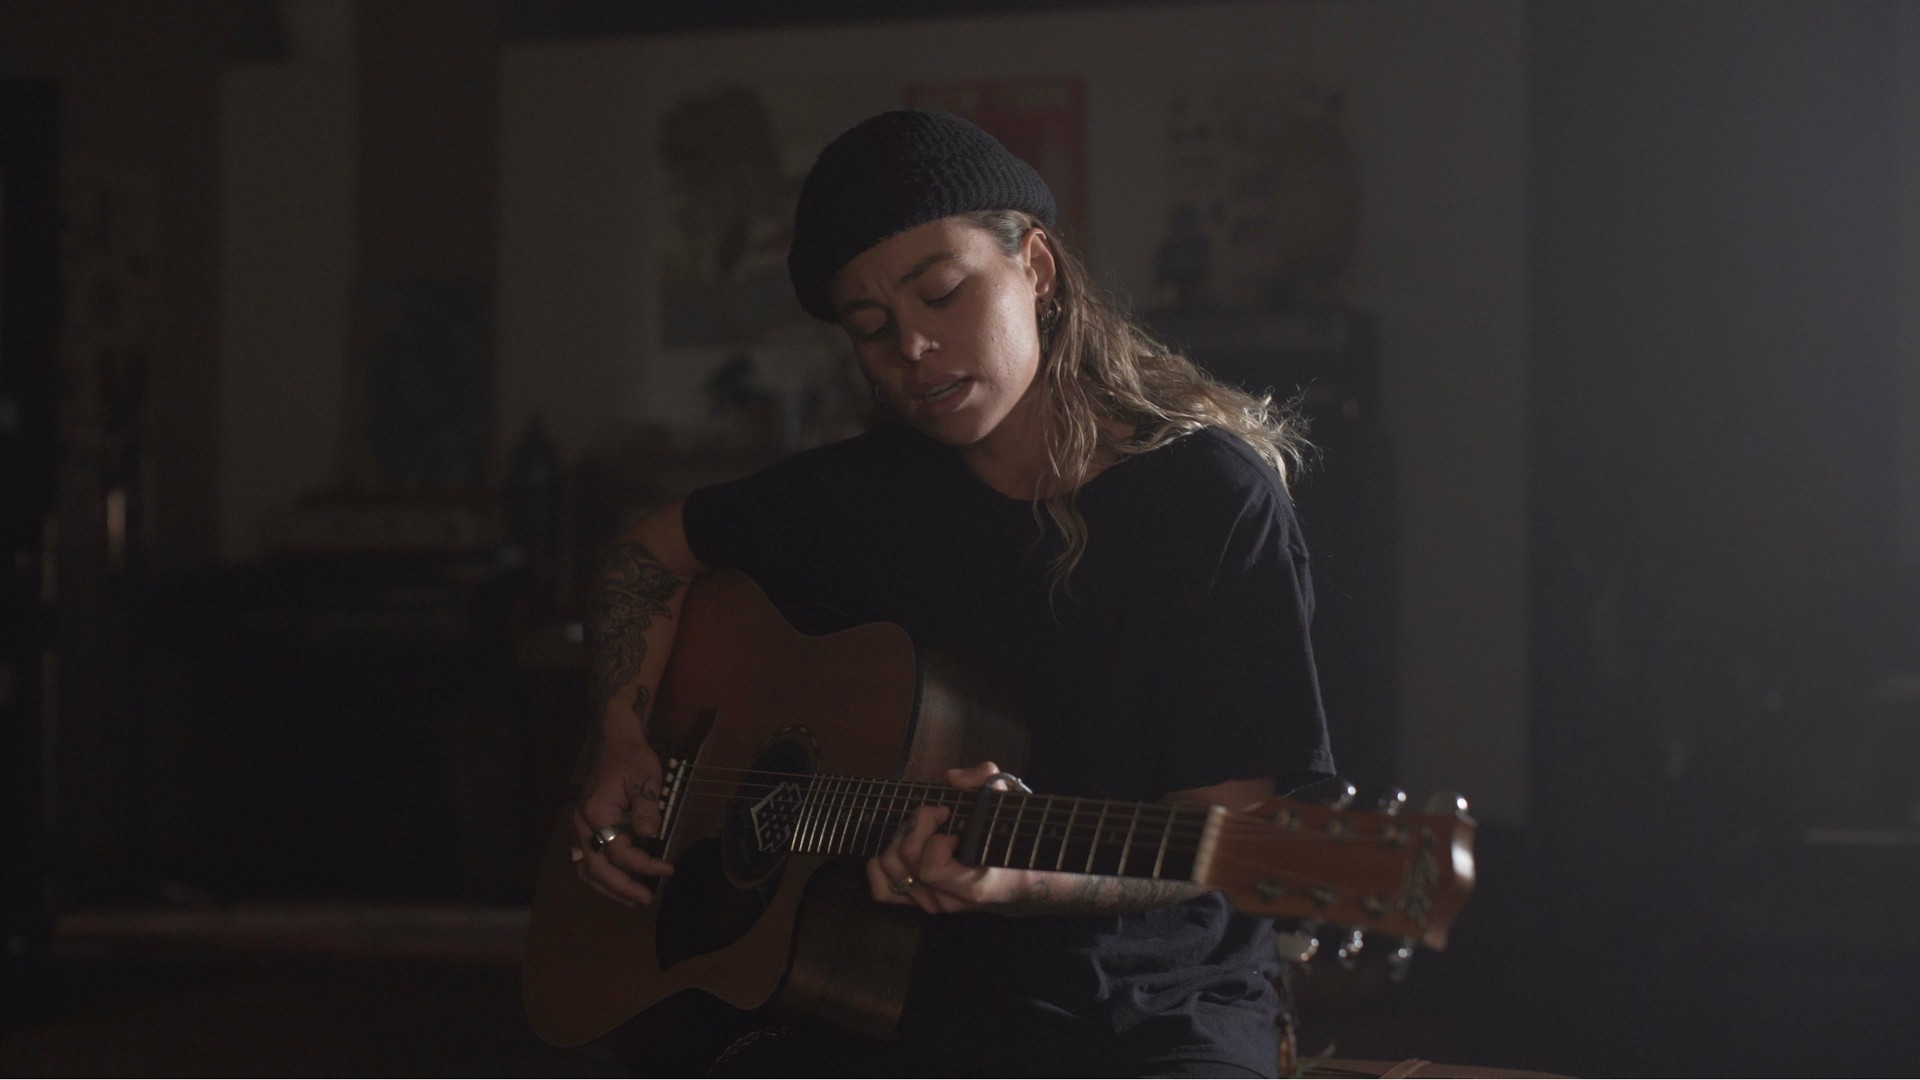 Global Music Star Tash Sultana Records Powerful Cover Track For Launch Of ‘The Last Of Us Part II’ – Sequel To One Of The Biggest Games In Playstation History